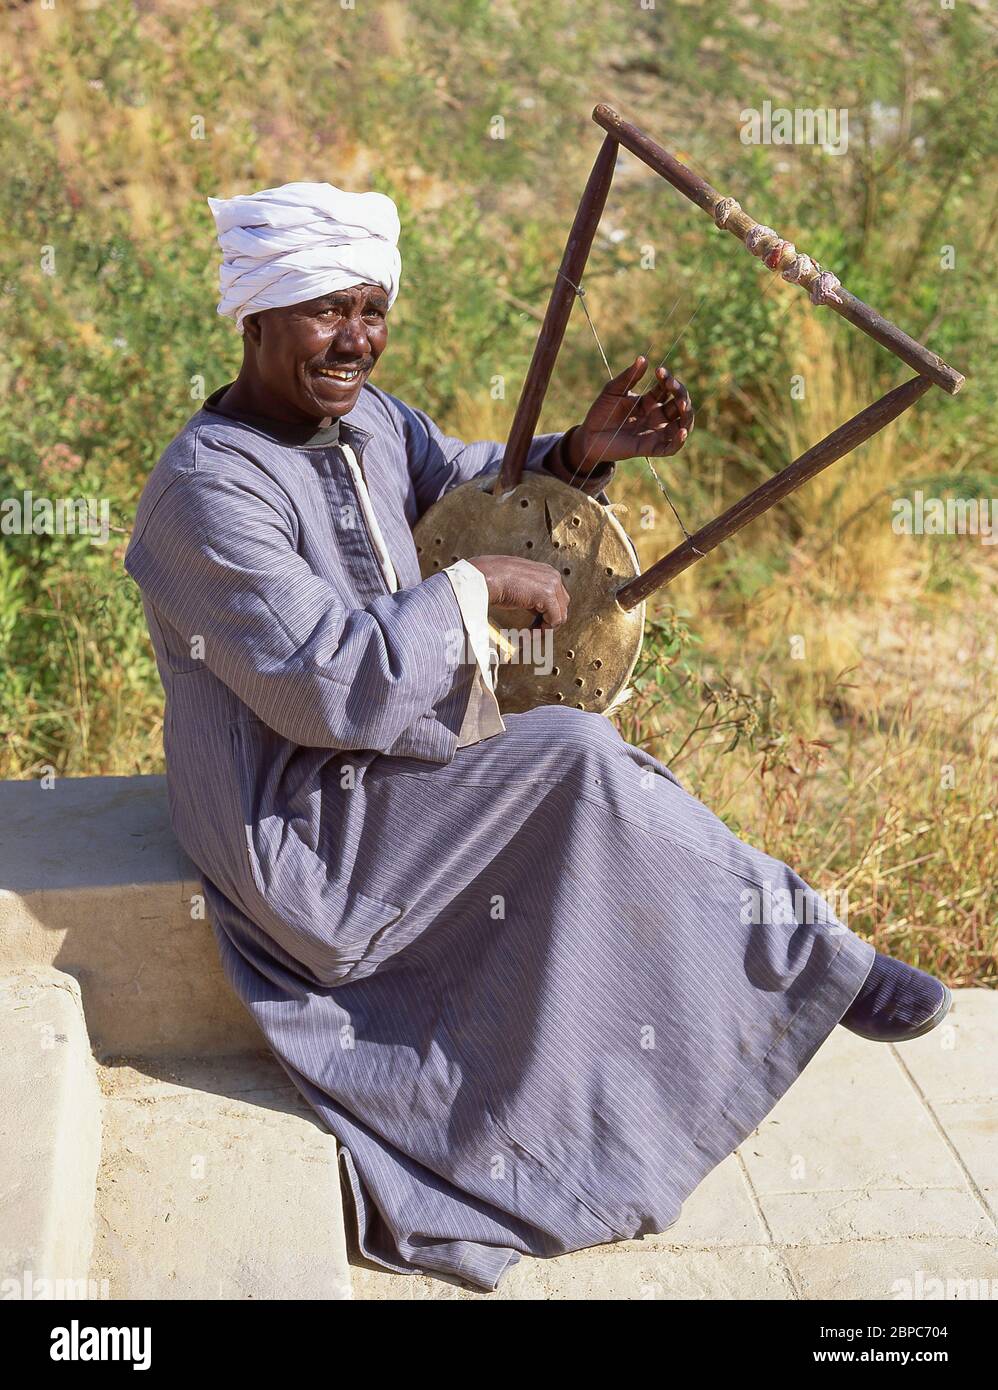 Local man playing musical string instrument, Luxor, Luxor Governorate, Republic of Egypt Stock Photo